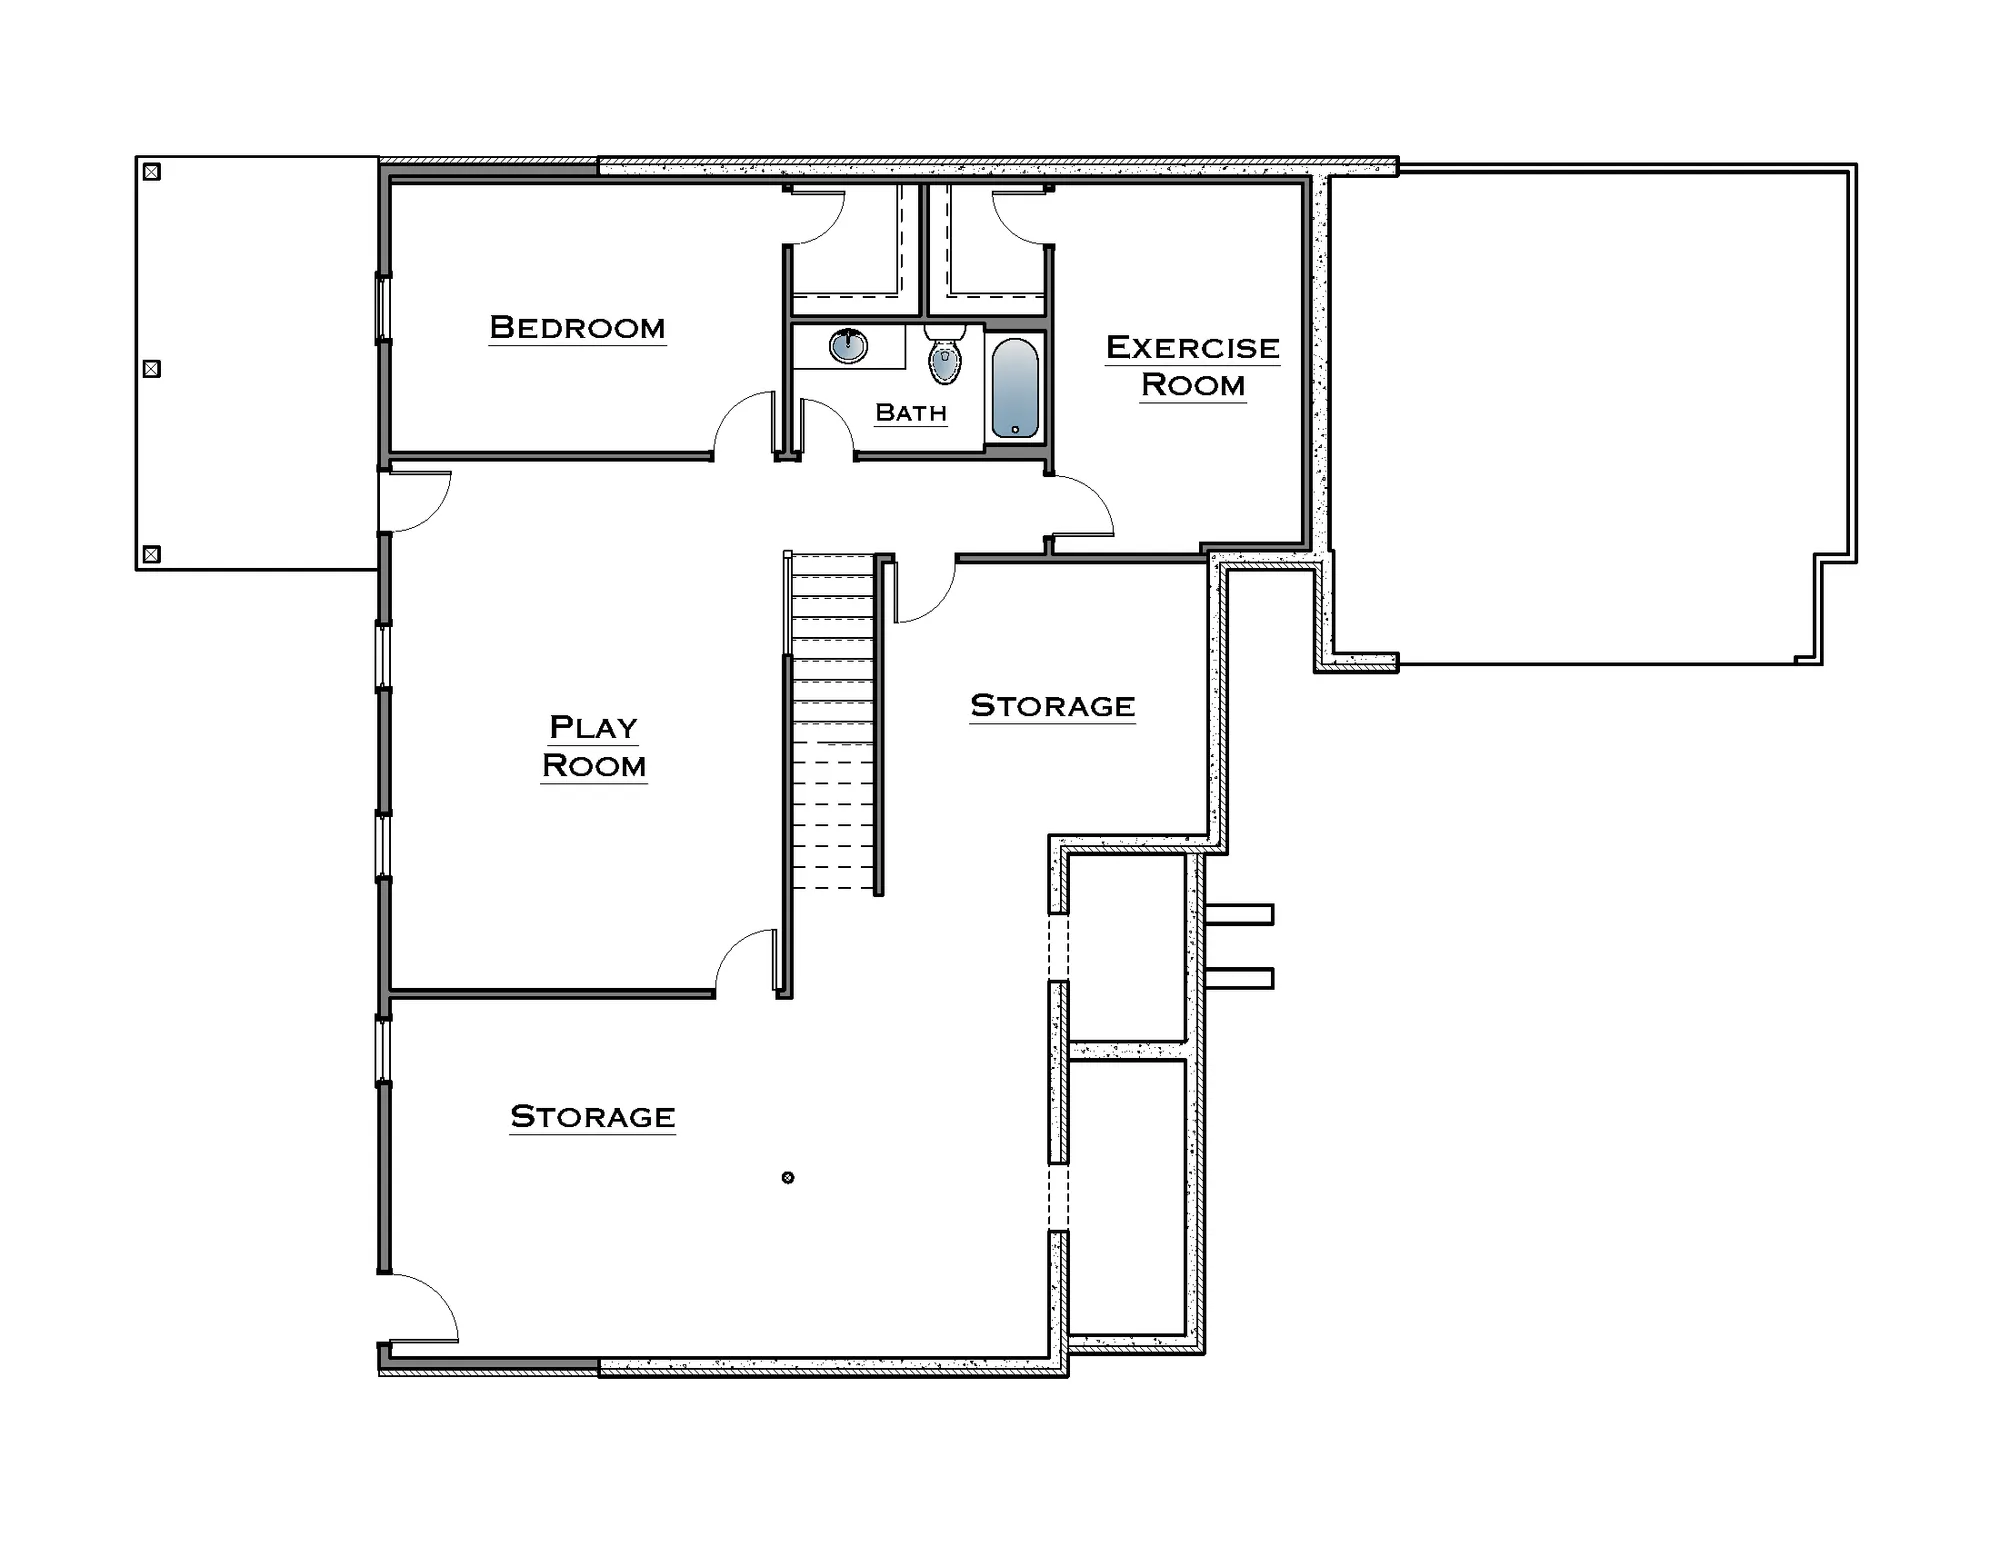 Finished Basement with Exercise Room, Play Room, Bedroom, Full Bath, & Unfinished Storage - undefined